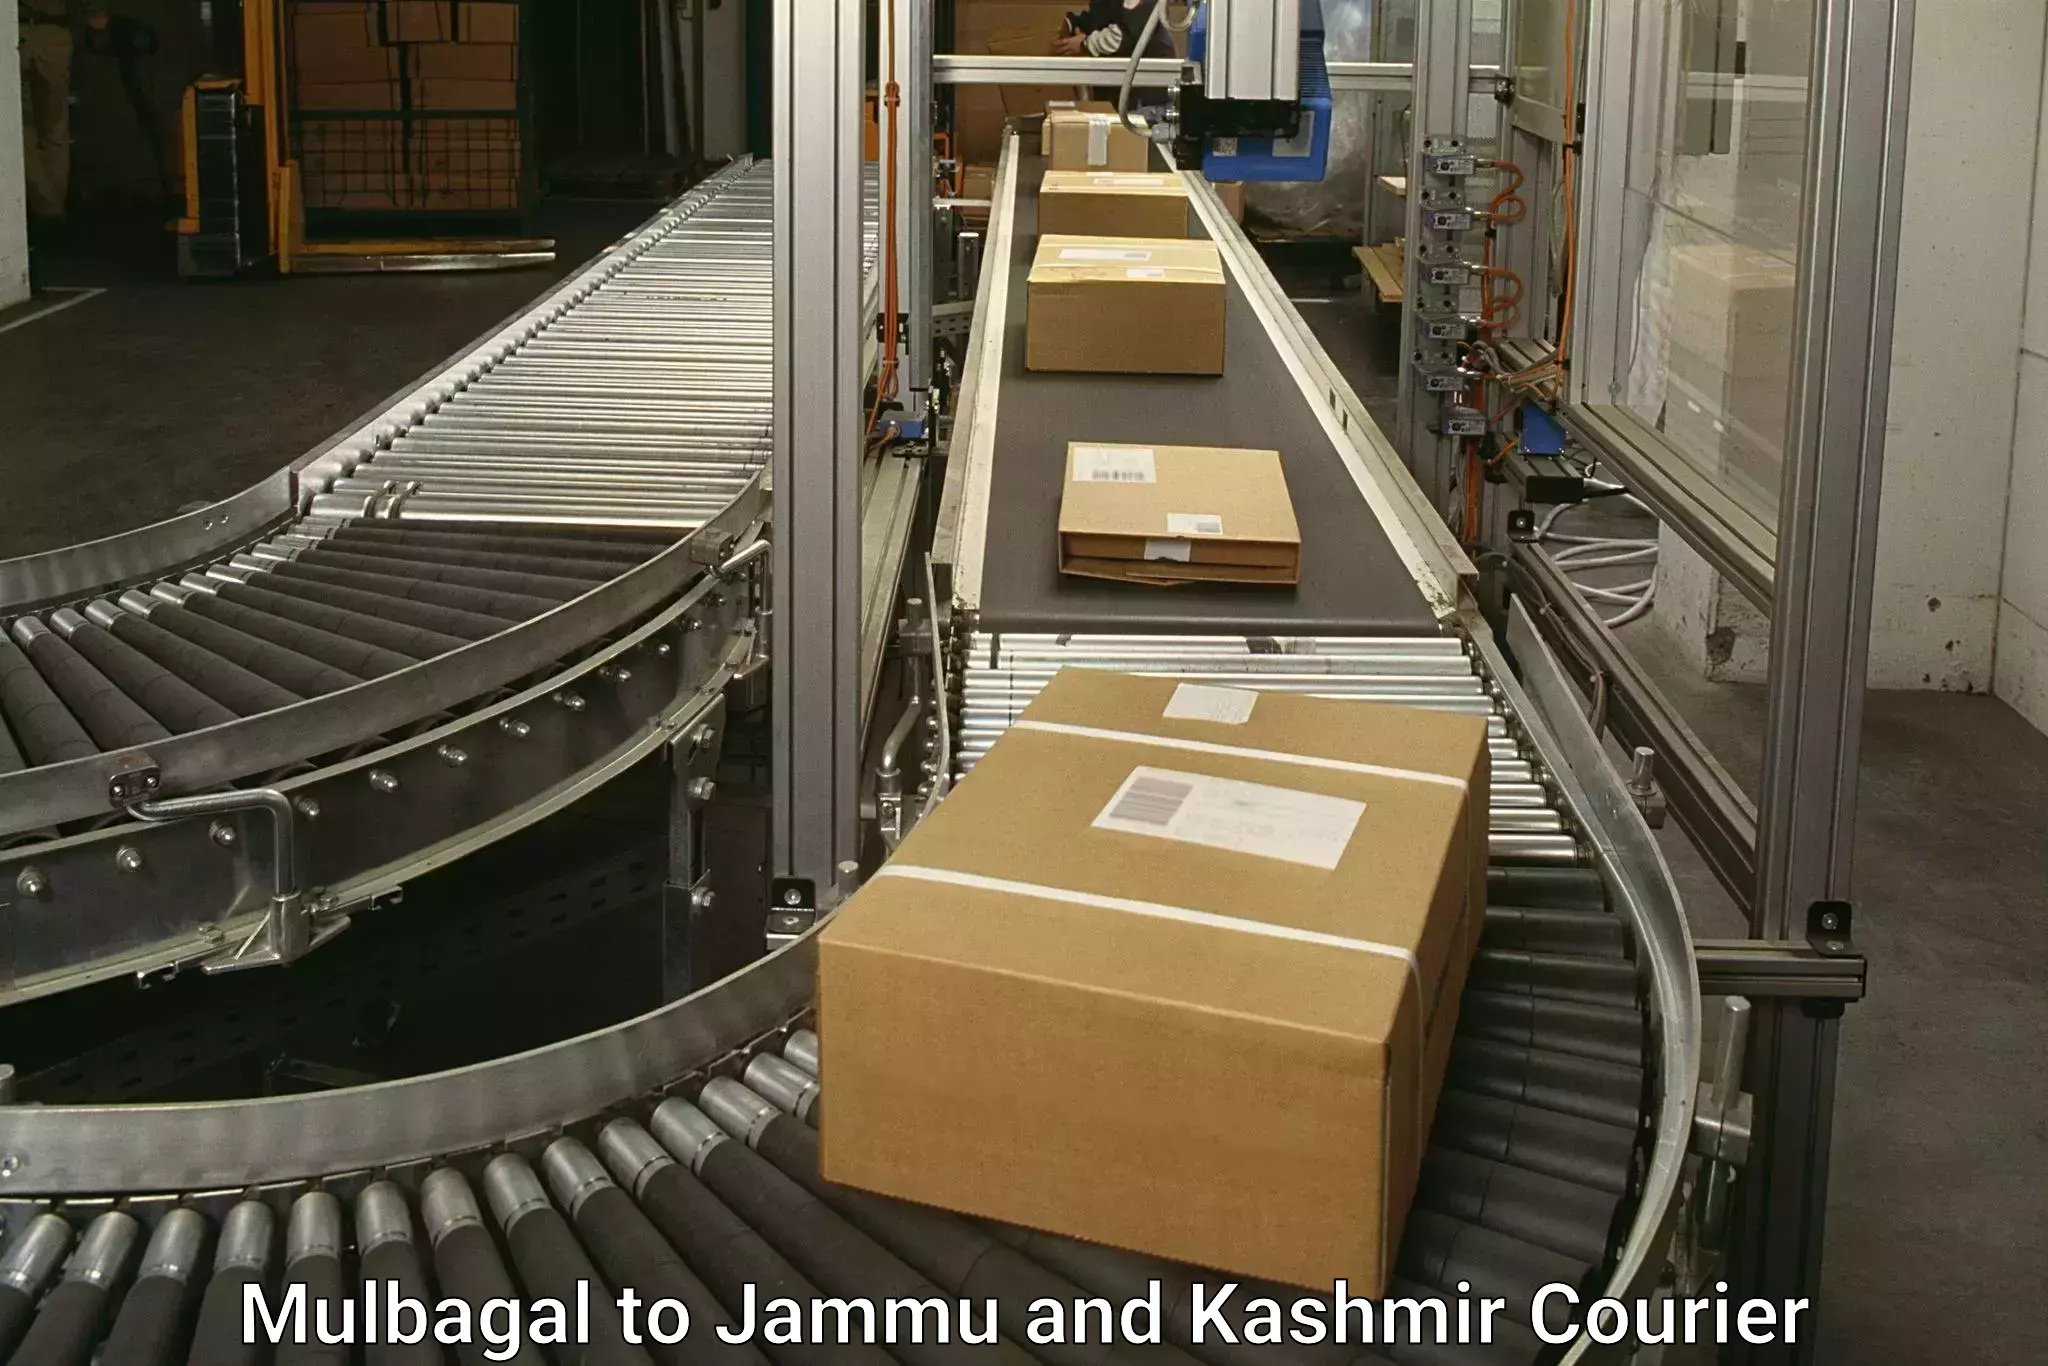 Courier membership Mulbagal to Anantnag